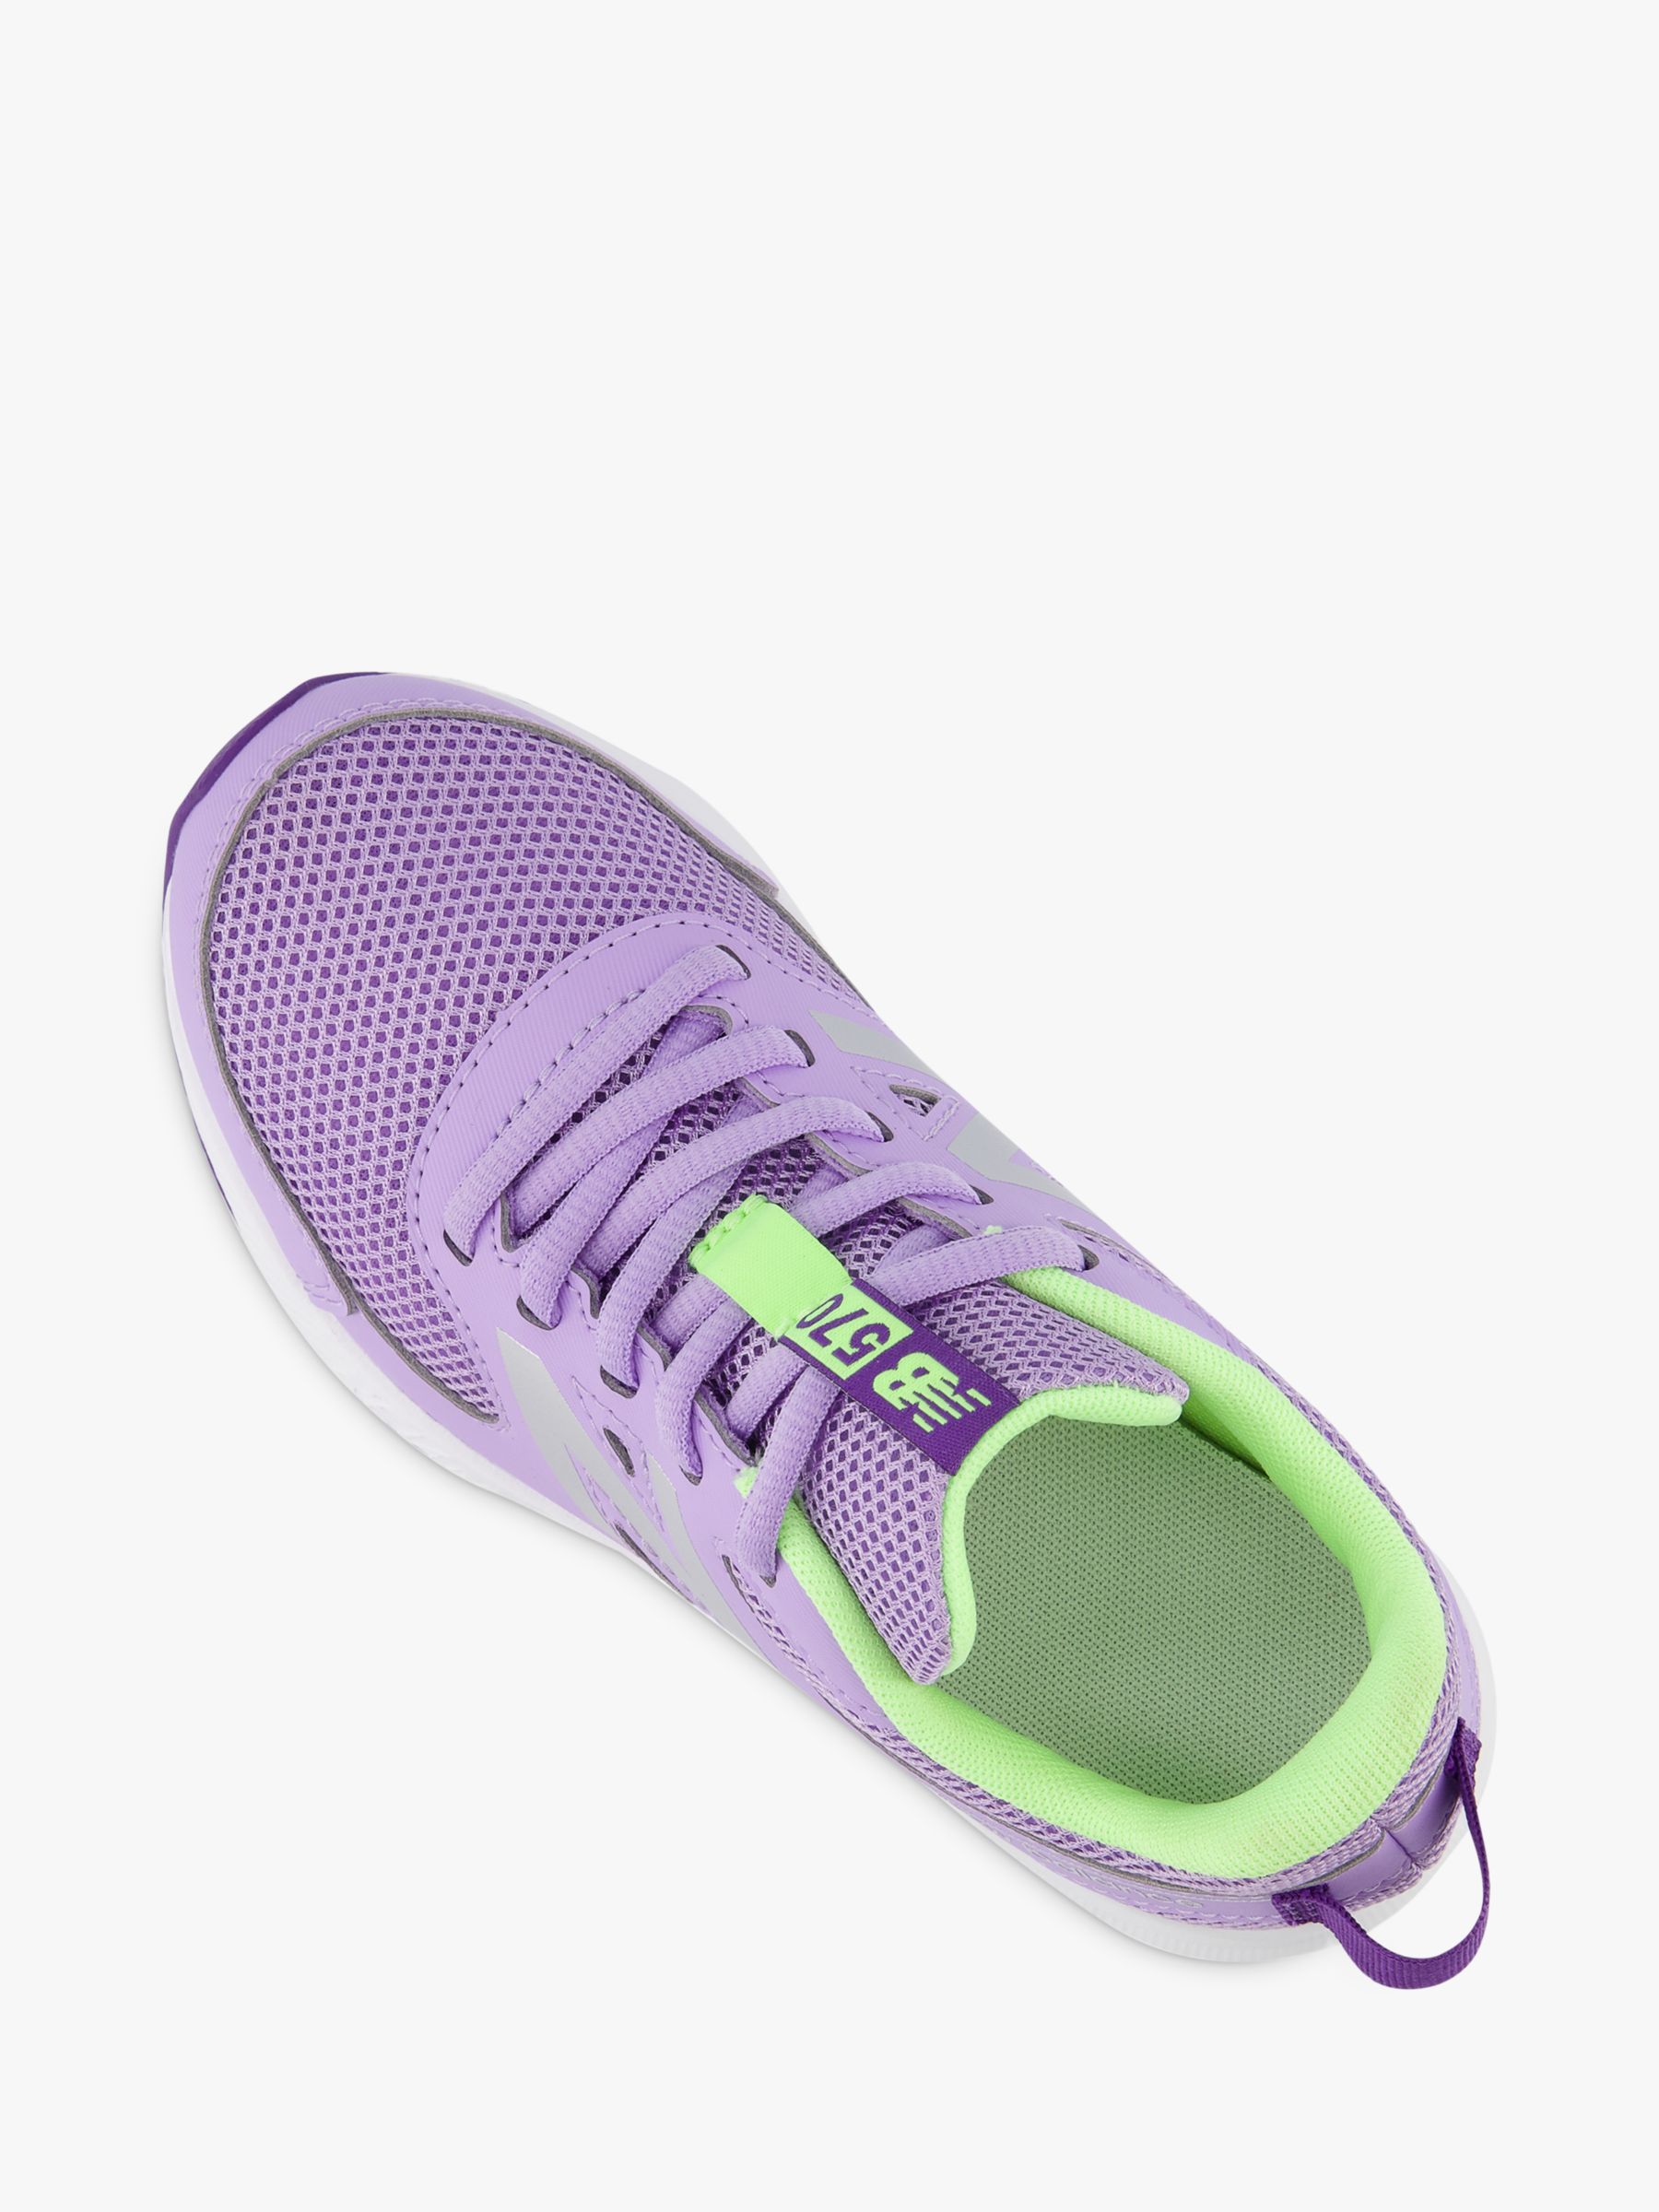 New Balance Kids' 570v3 Lace-Up Trainers, Lilac, 3